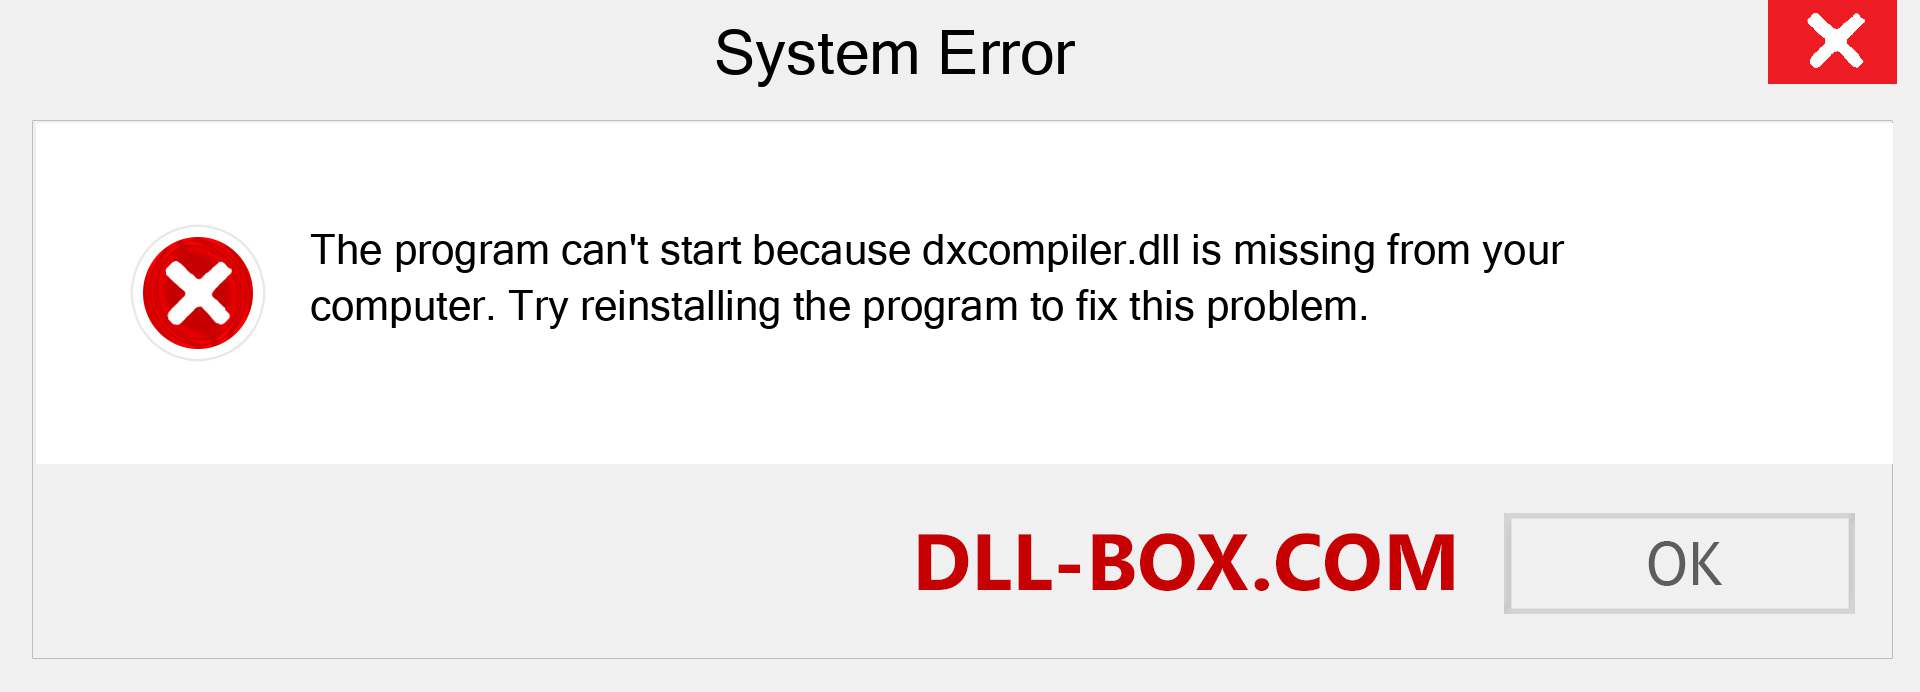  dxcompiler.dll file is missing?. Download for Windows 7, 8, 10 - Fix  dxcompiler dll Missing Error on Windows, photos, images